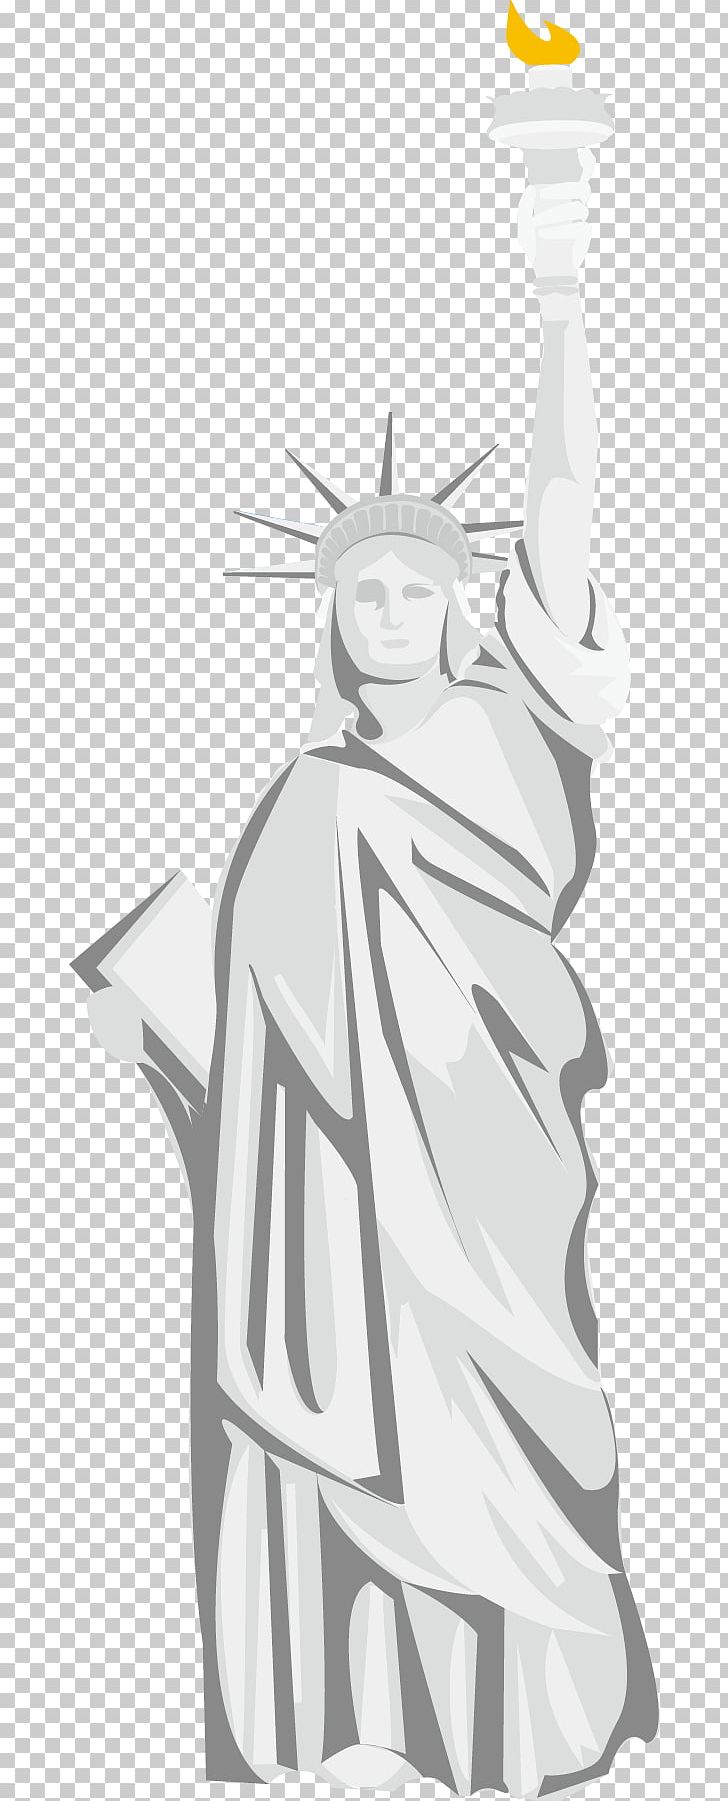 Statue Of Liberty Black And White PNG, Clipart, Black And White, Buddha Statue, Cartoon, Designer, Download Free PNG Download